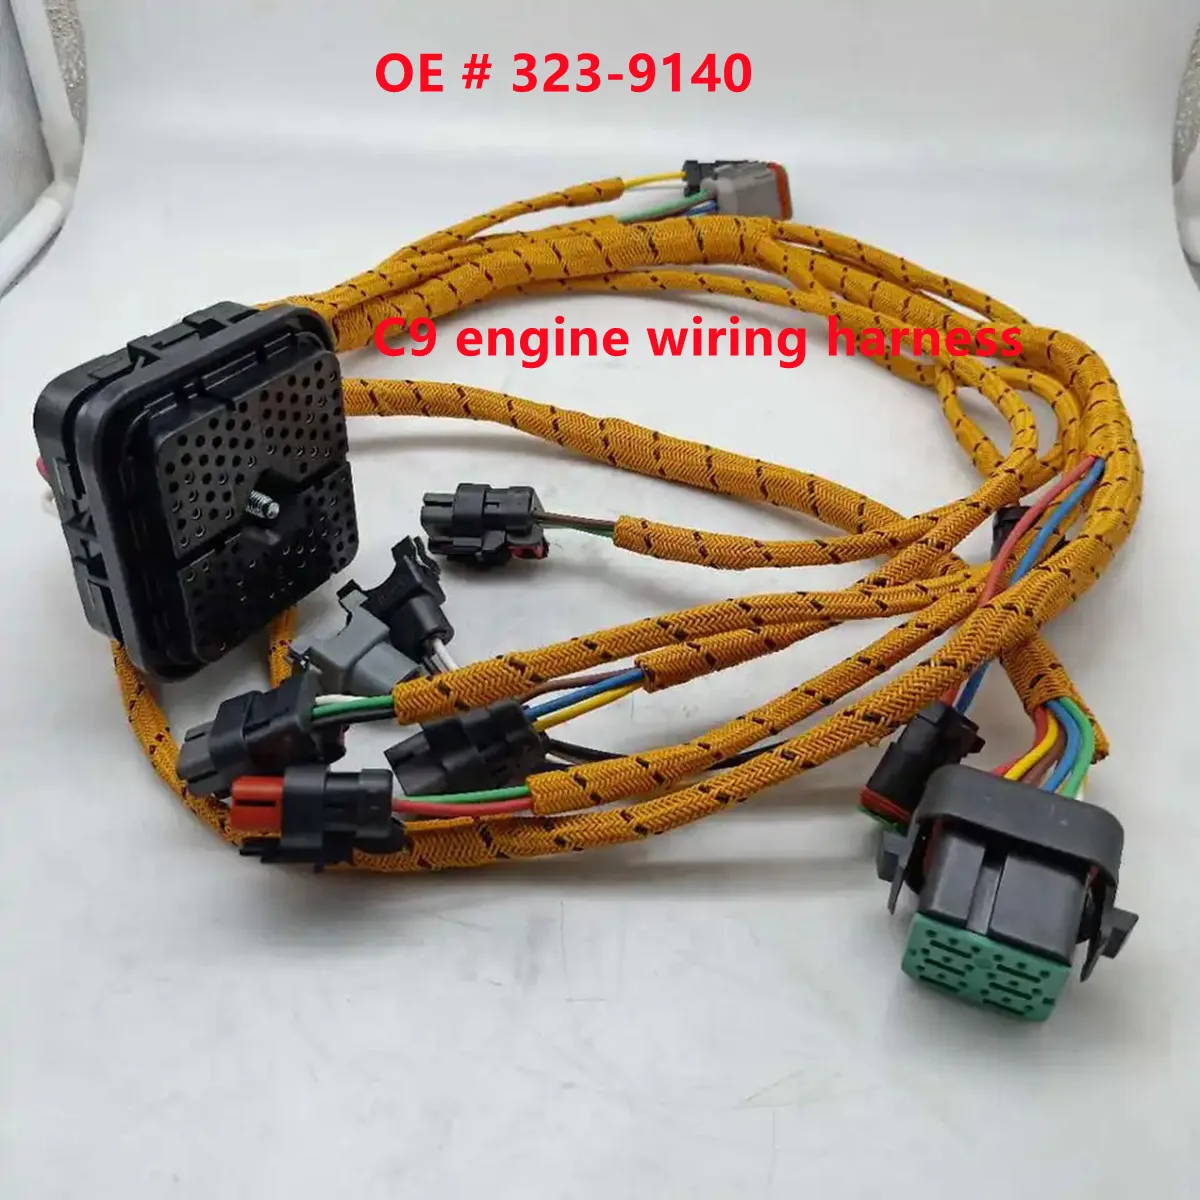 323-9140 3239140  New Engine Wiring Harness for CAT Excavator 330D/336D C9 Engin - £362.04 GBP